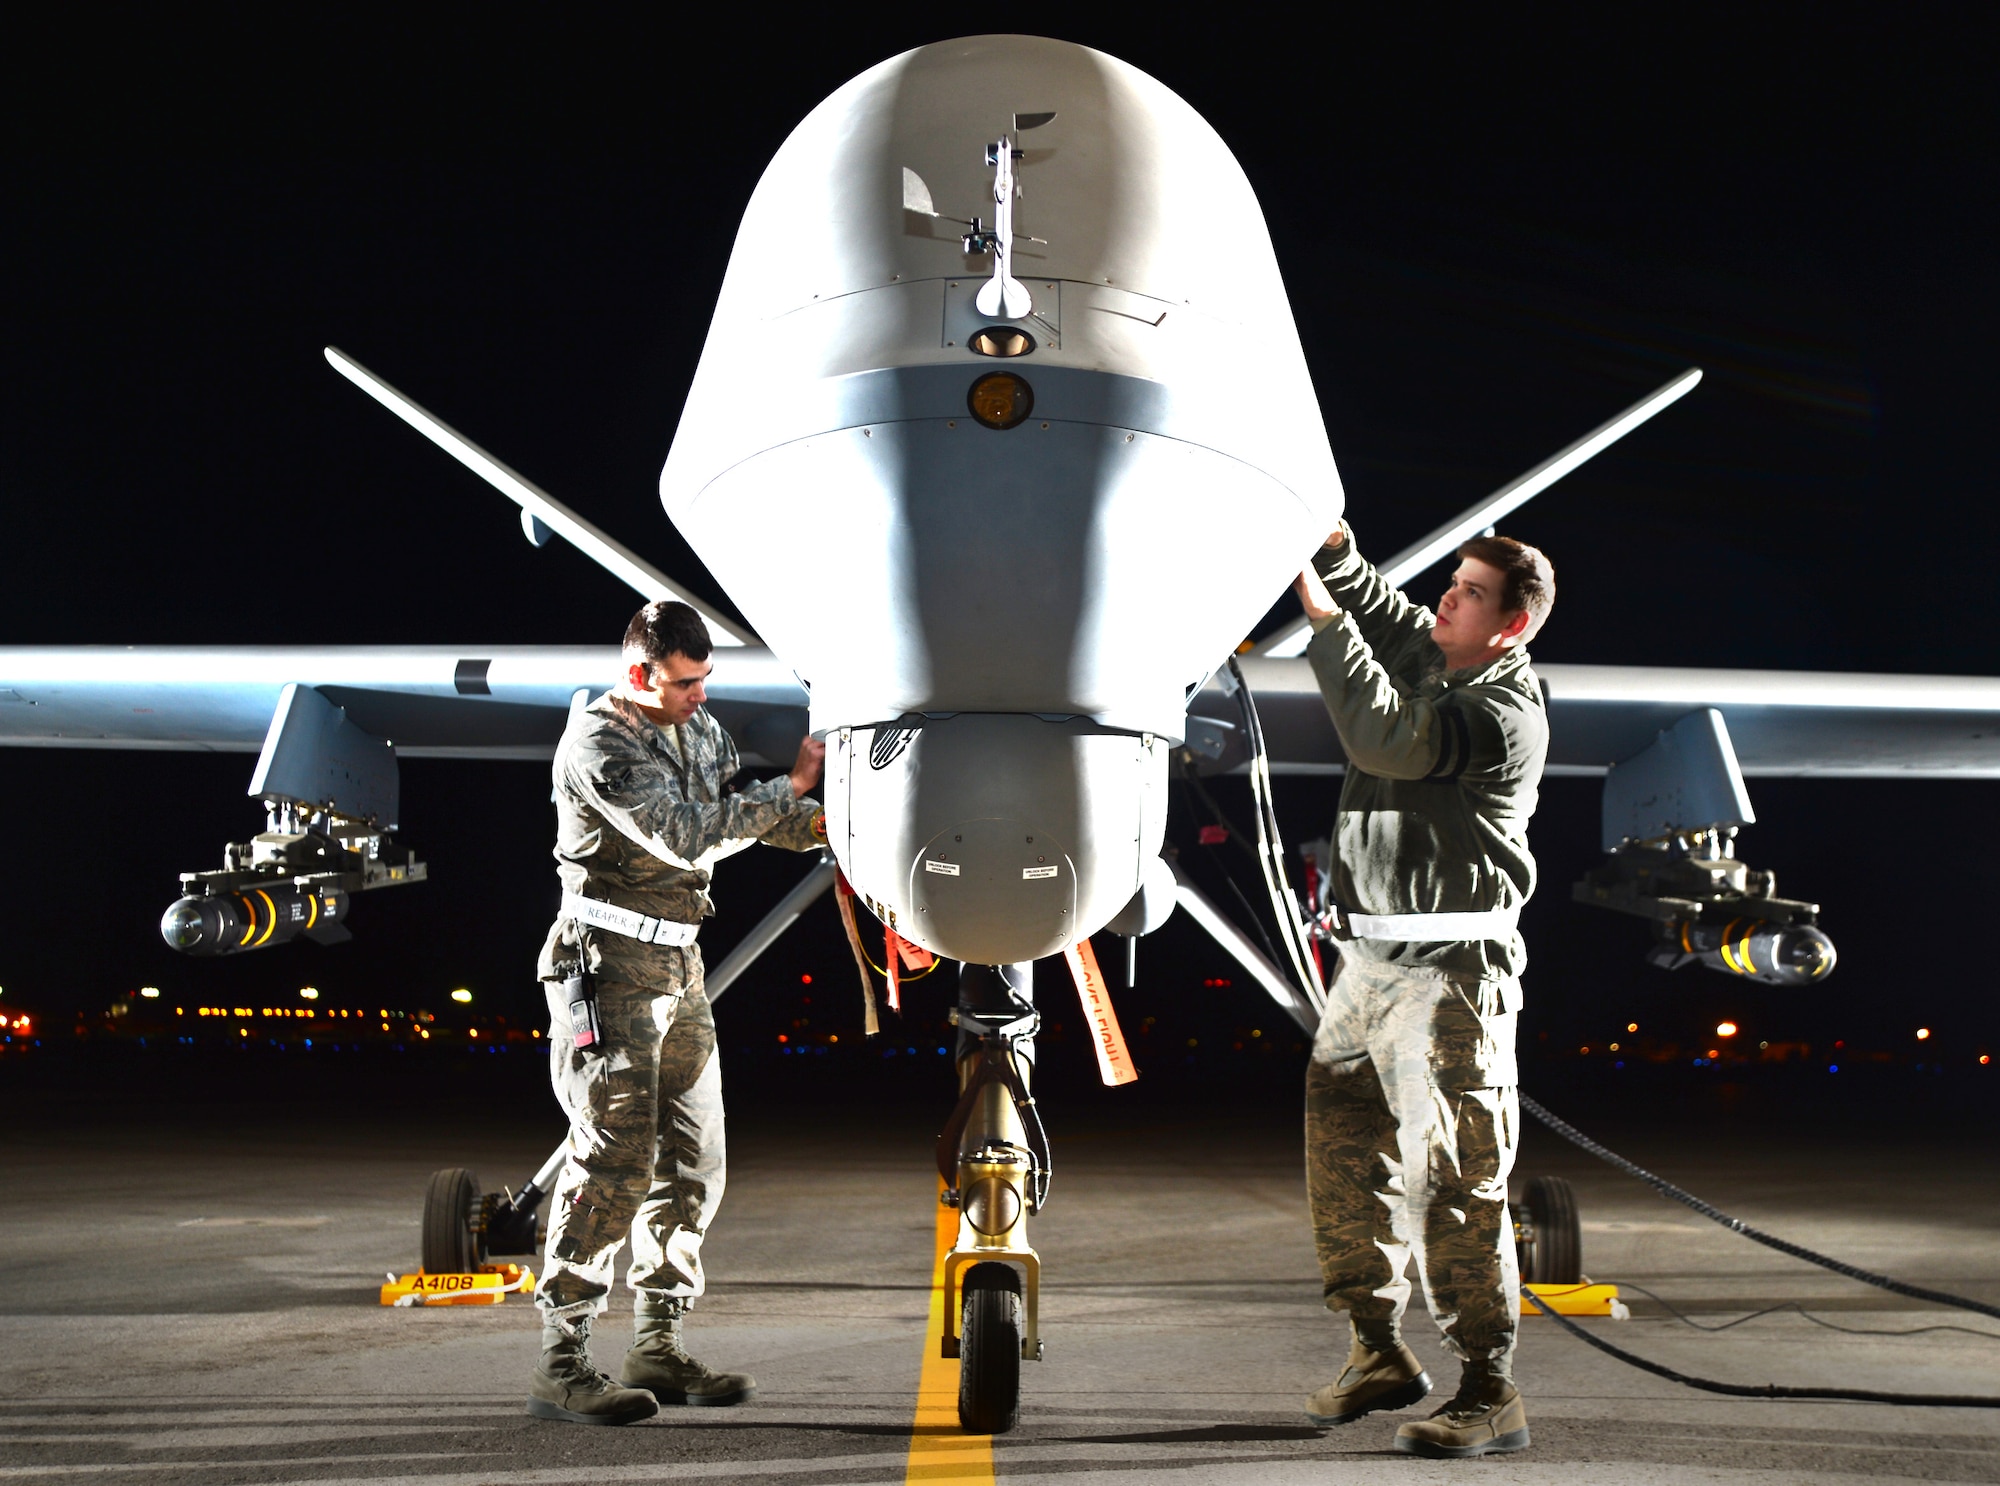 Airman 1st Class Steven, 432nd Aircraft Maintenance Squadron MQ-9 Reaper crew chief (left), and Airman 1st Class Taylor, 432nd Aircraft Maintenance Squadron MQ-9 Reaper crew chief (right), prepare an MQ-9 Reaper for flight during Combat Hammer May 15, 2014, Creech Air Force Base, Nev. Fighter, bomber and remotely piloted aircraft units around the Air Force are evaluated four times a year and provided weapons, airspace and targets from Hill AFB, Utah, or Eglin AFB, Fla. (U.S. Air Force photo by Staff Sgt. Nadine Barclay/Released)